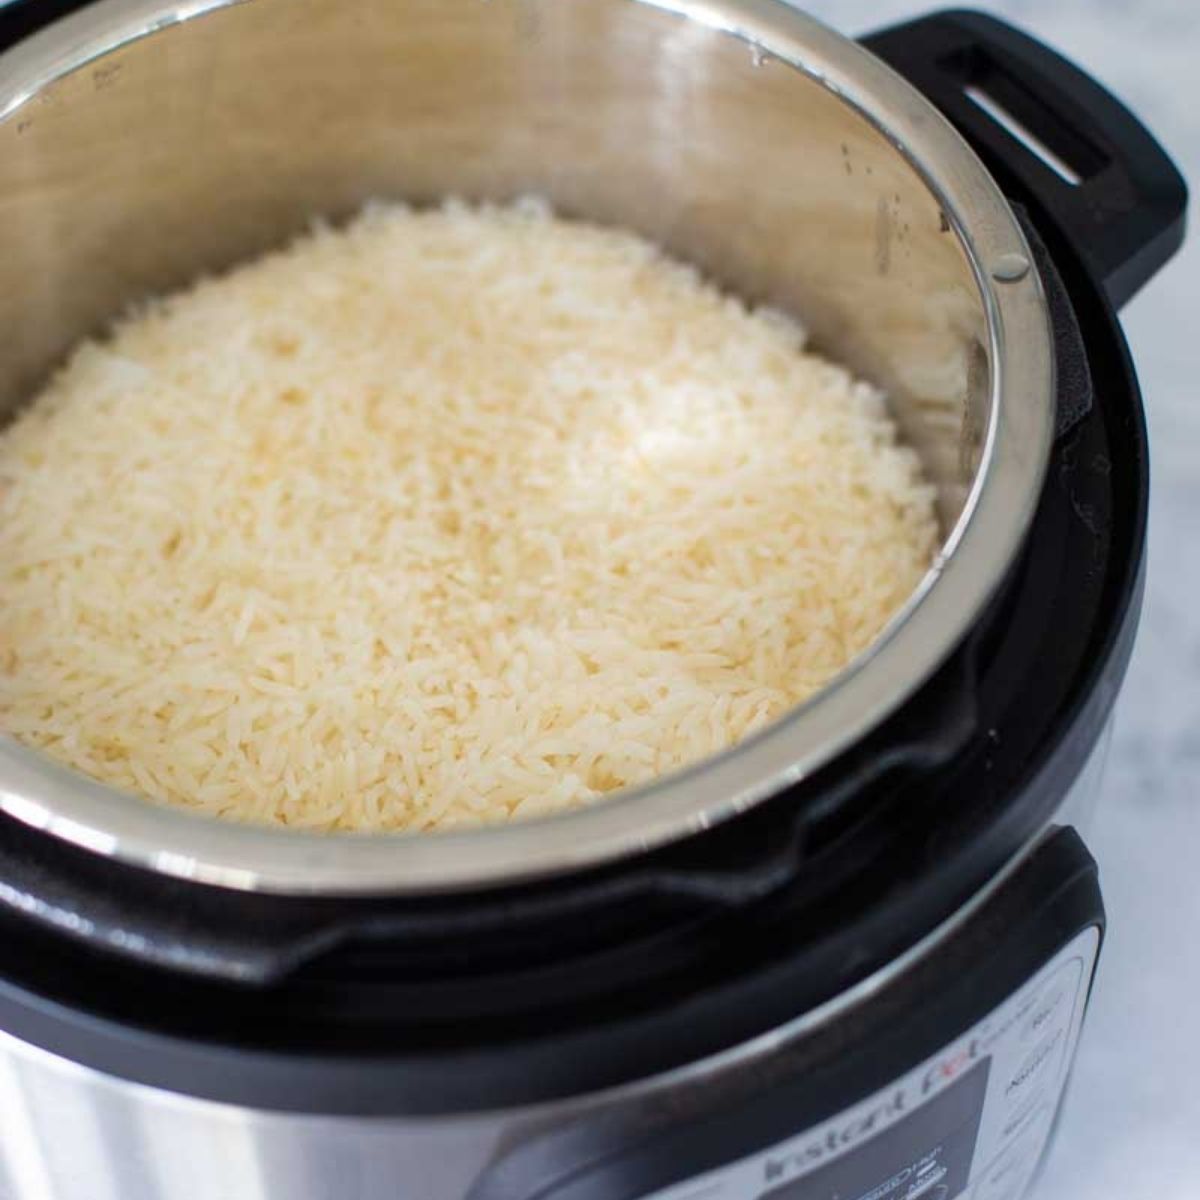 How to Cook Instant Pot Rice